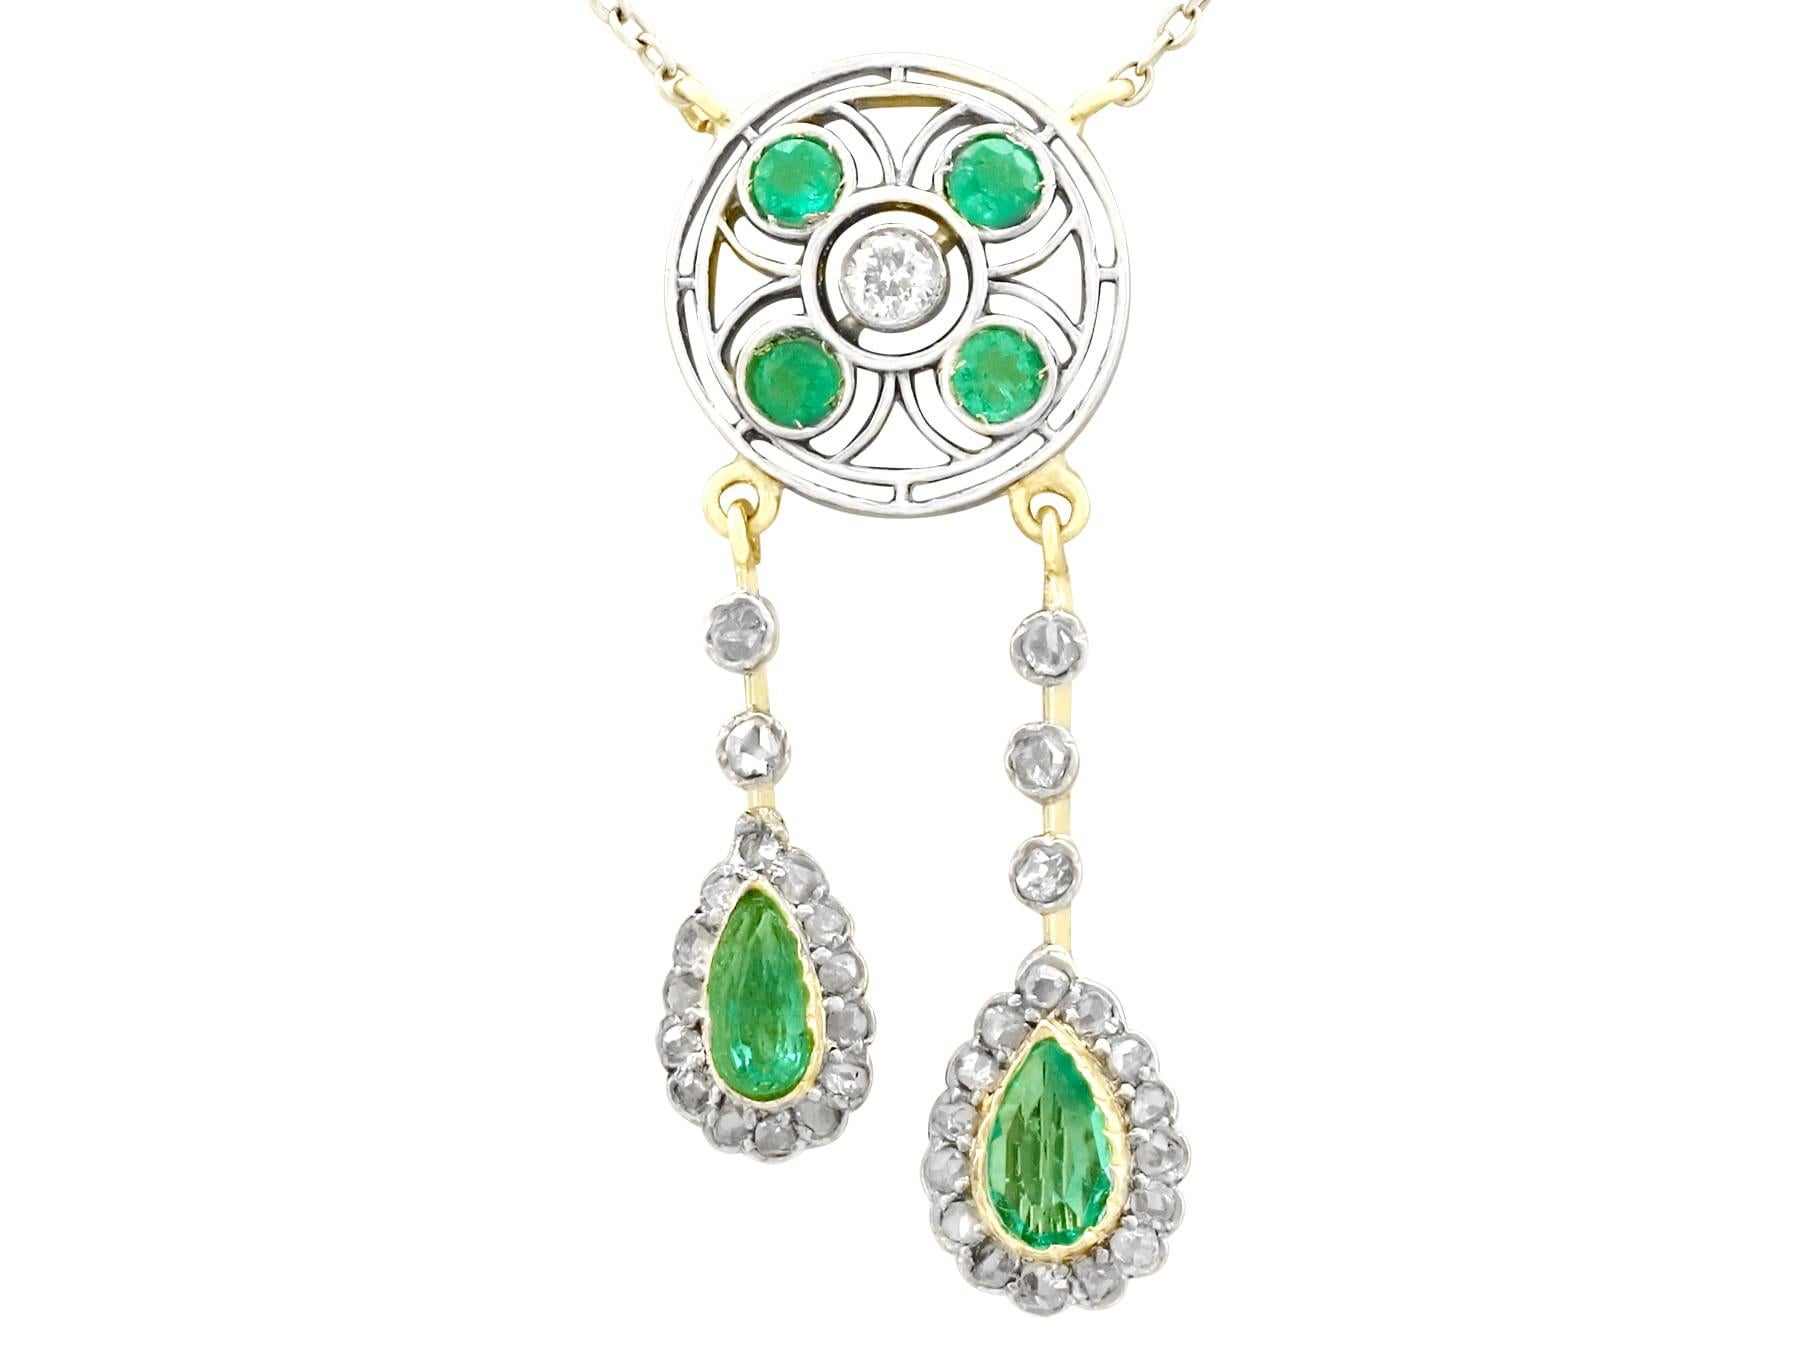 An impressive antique 1.32 carat emerald and 0.51 carat diamond, 15k yellow gold and palladium, platinum necklace; part of our diverse antique jewelry and estate jewelry collections.

This fine and impressive antique emerald pendant has been crafted